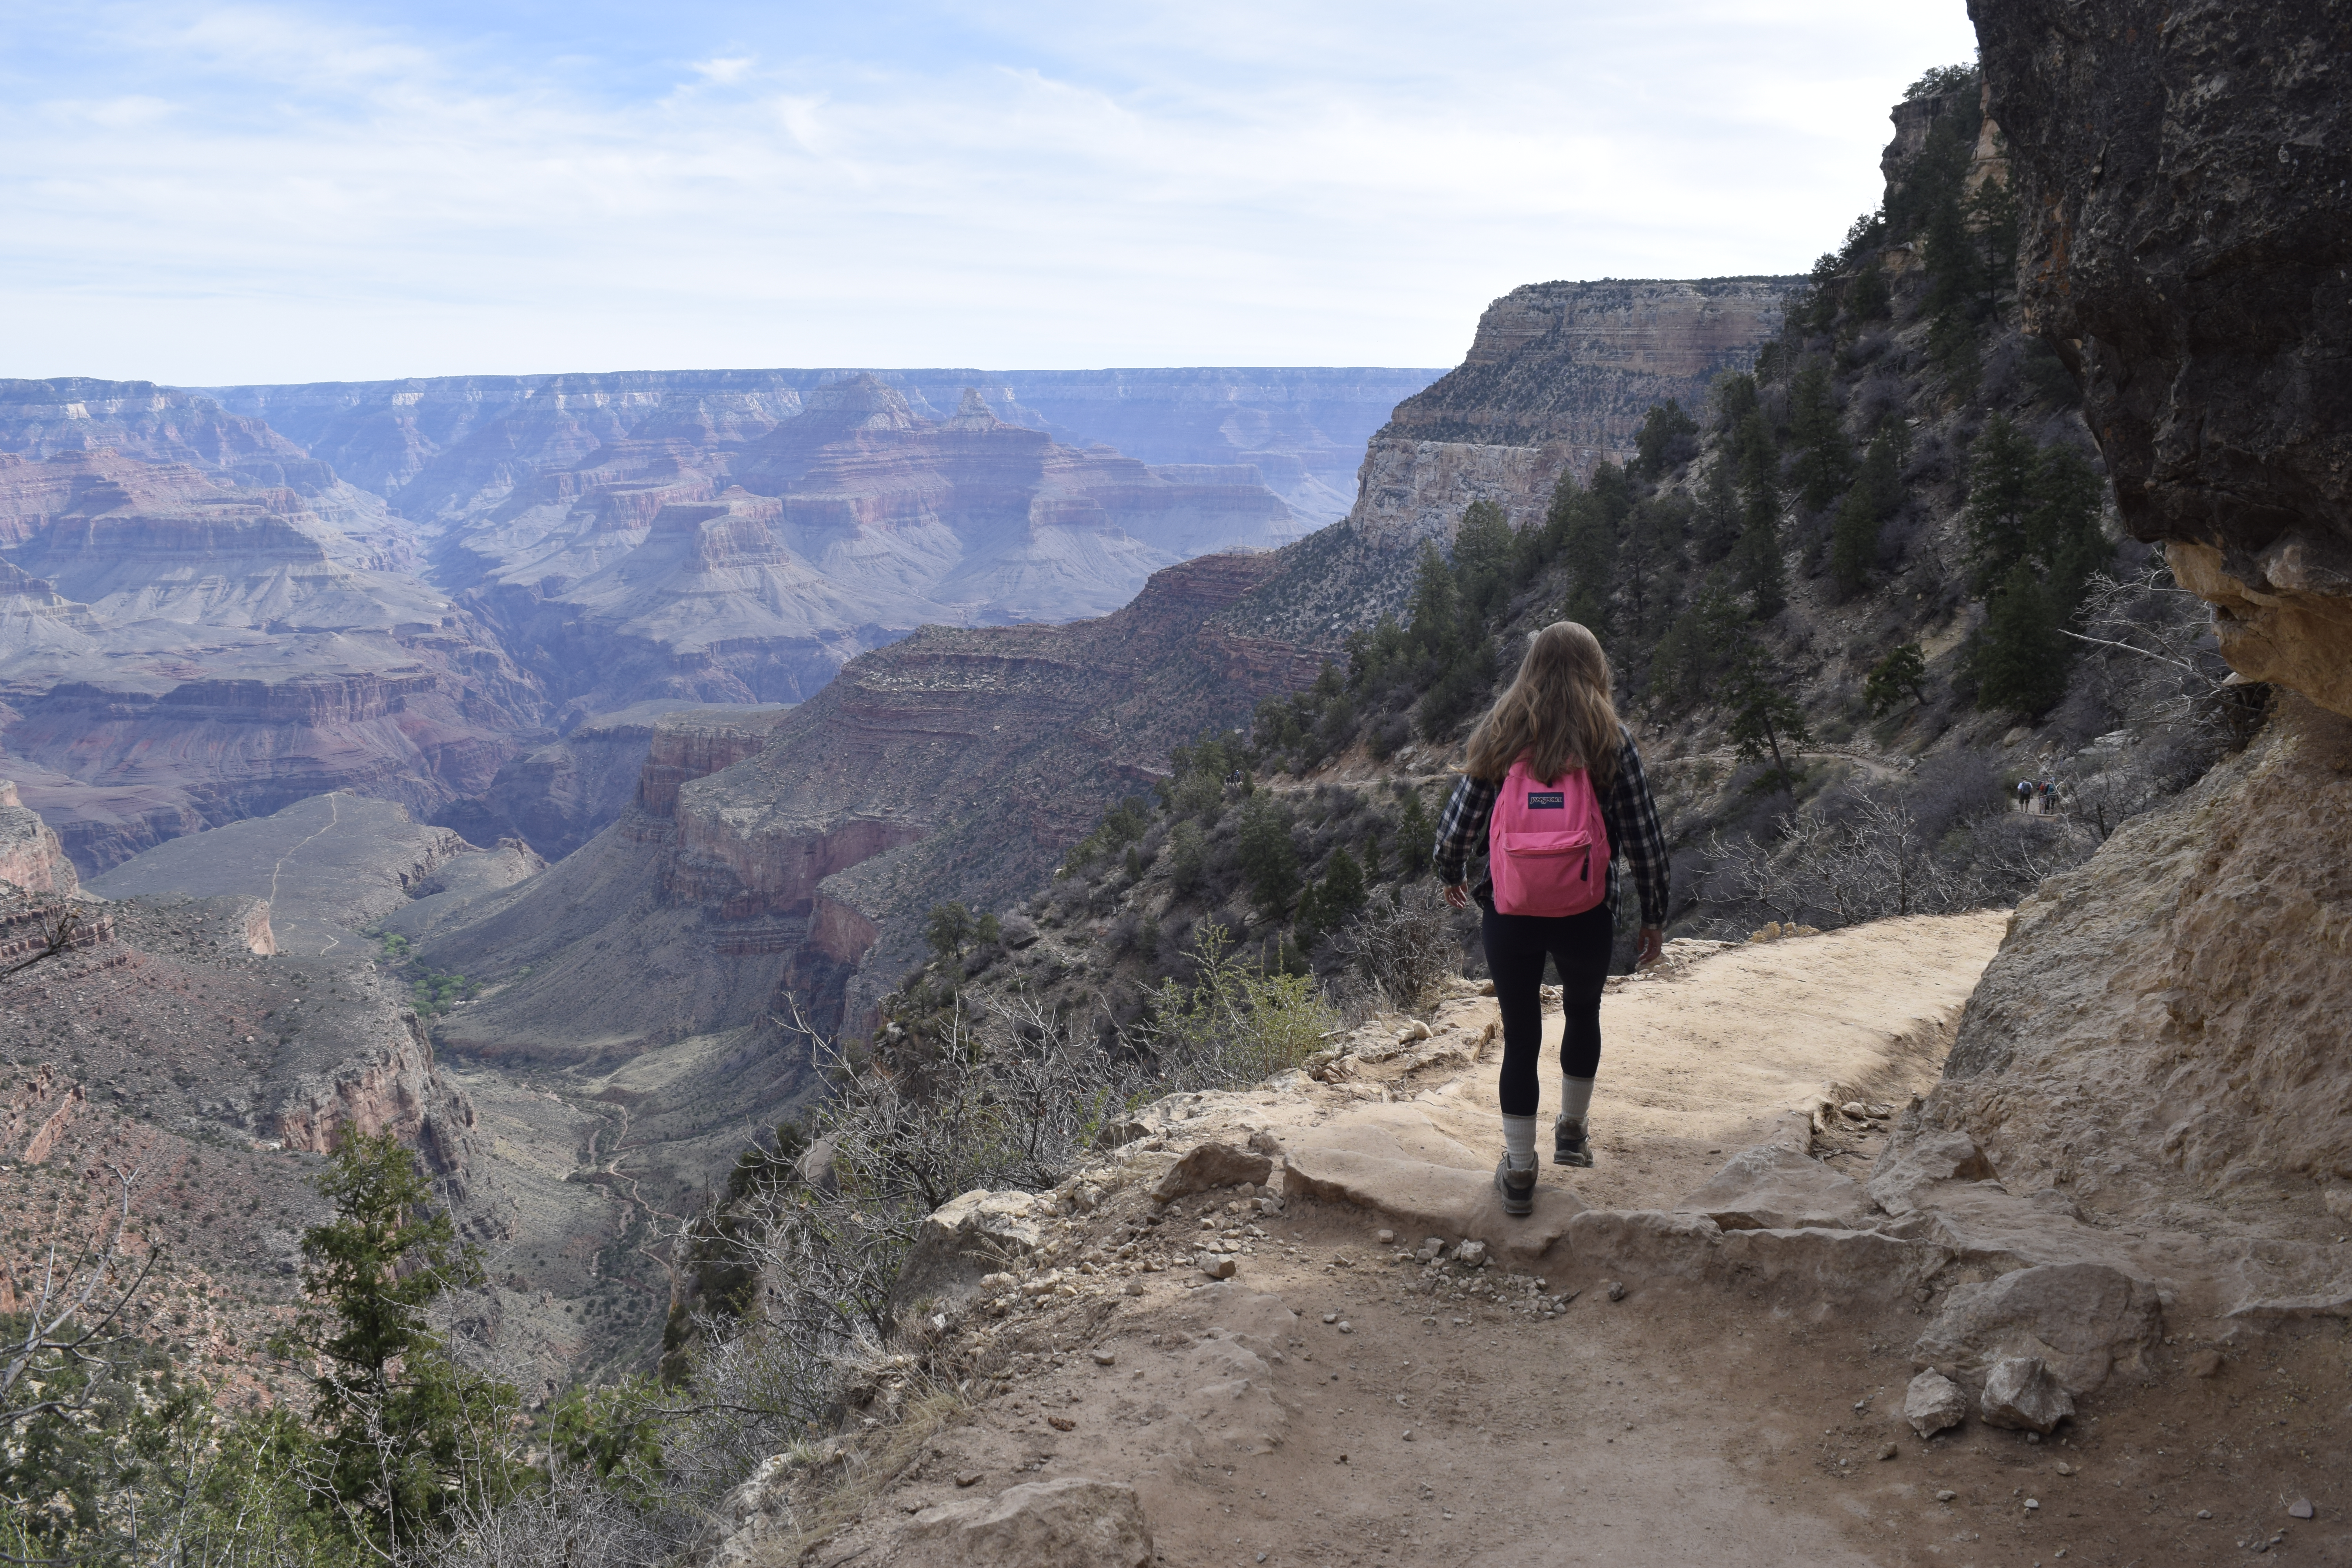 Taken on the Bright Angel Trail in the Grand Canyon.